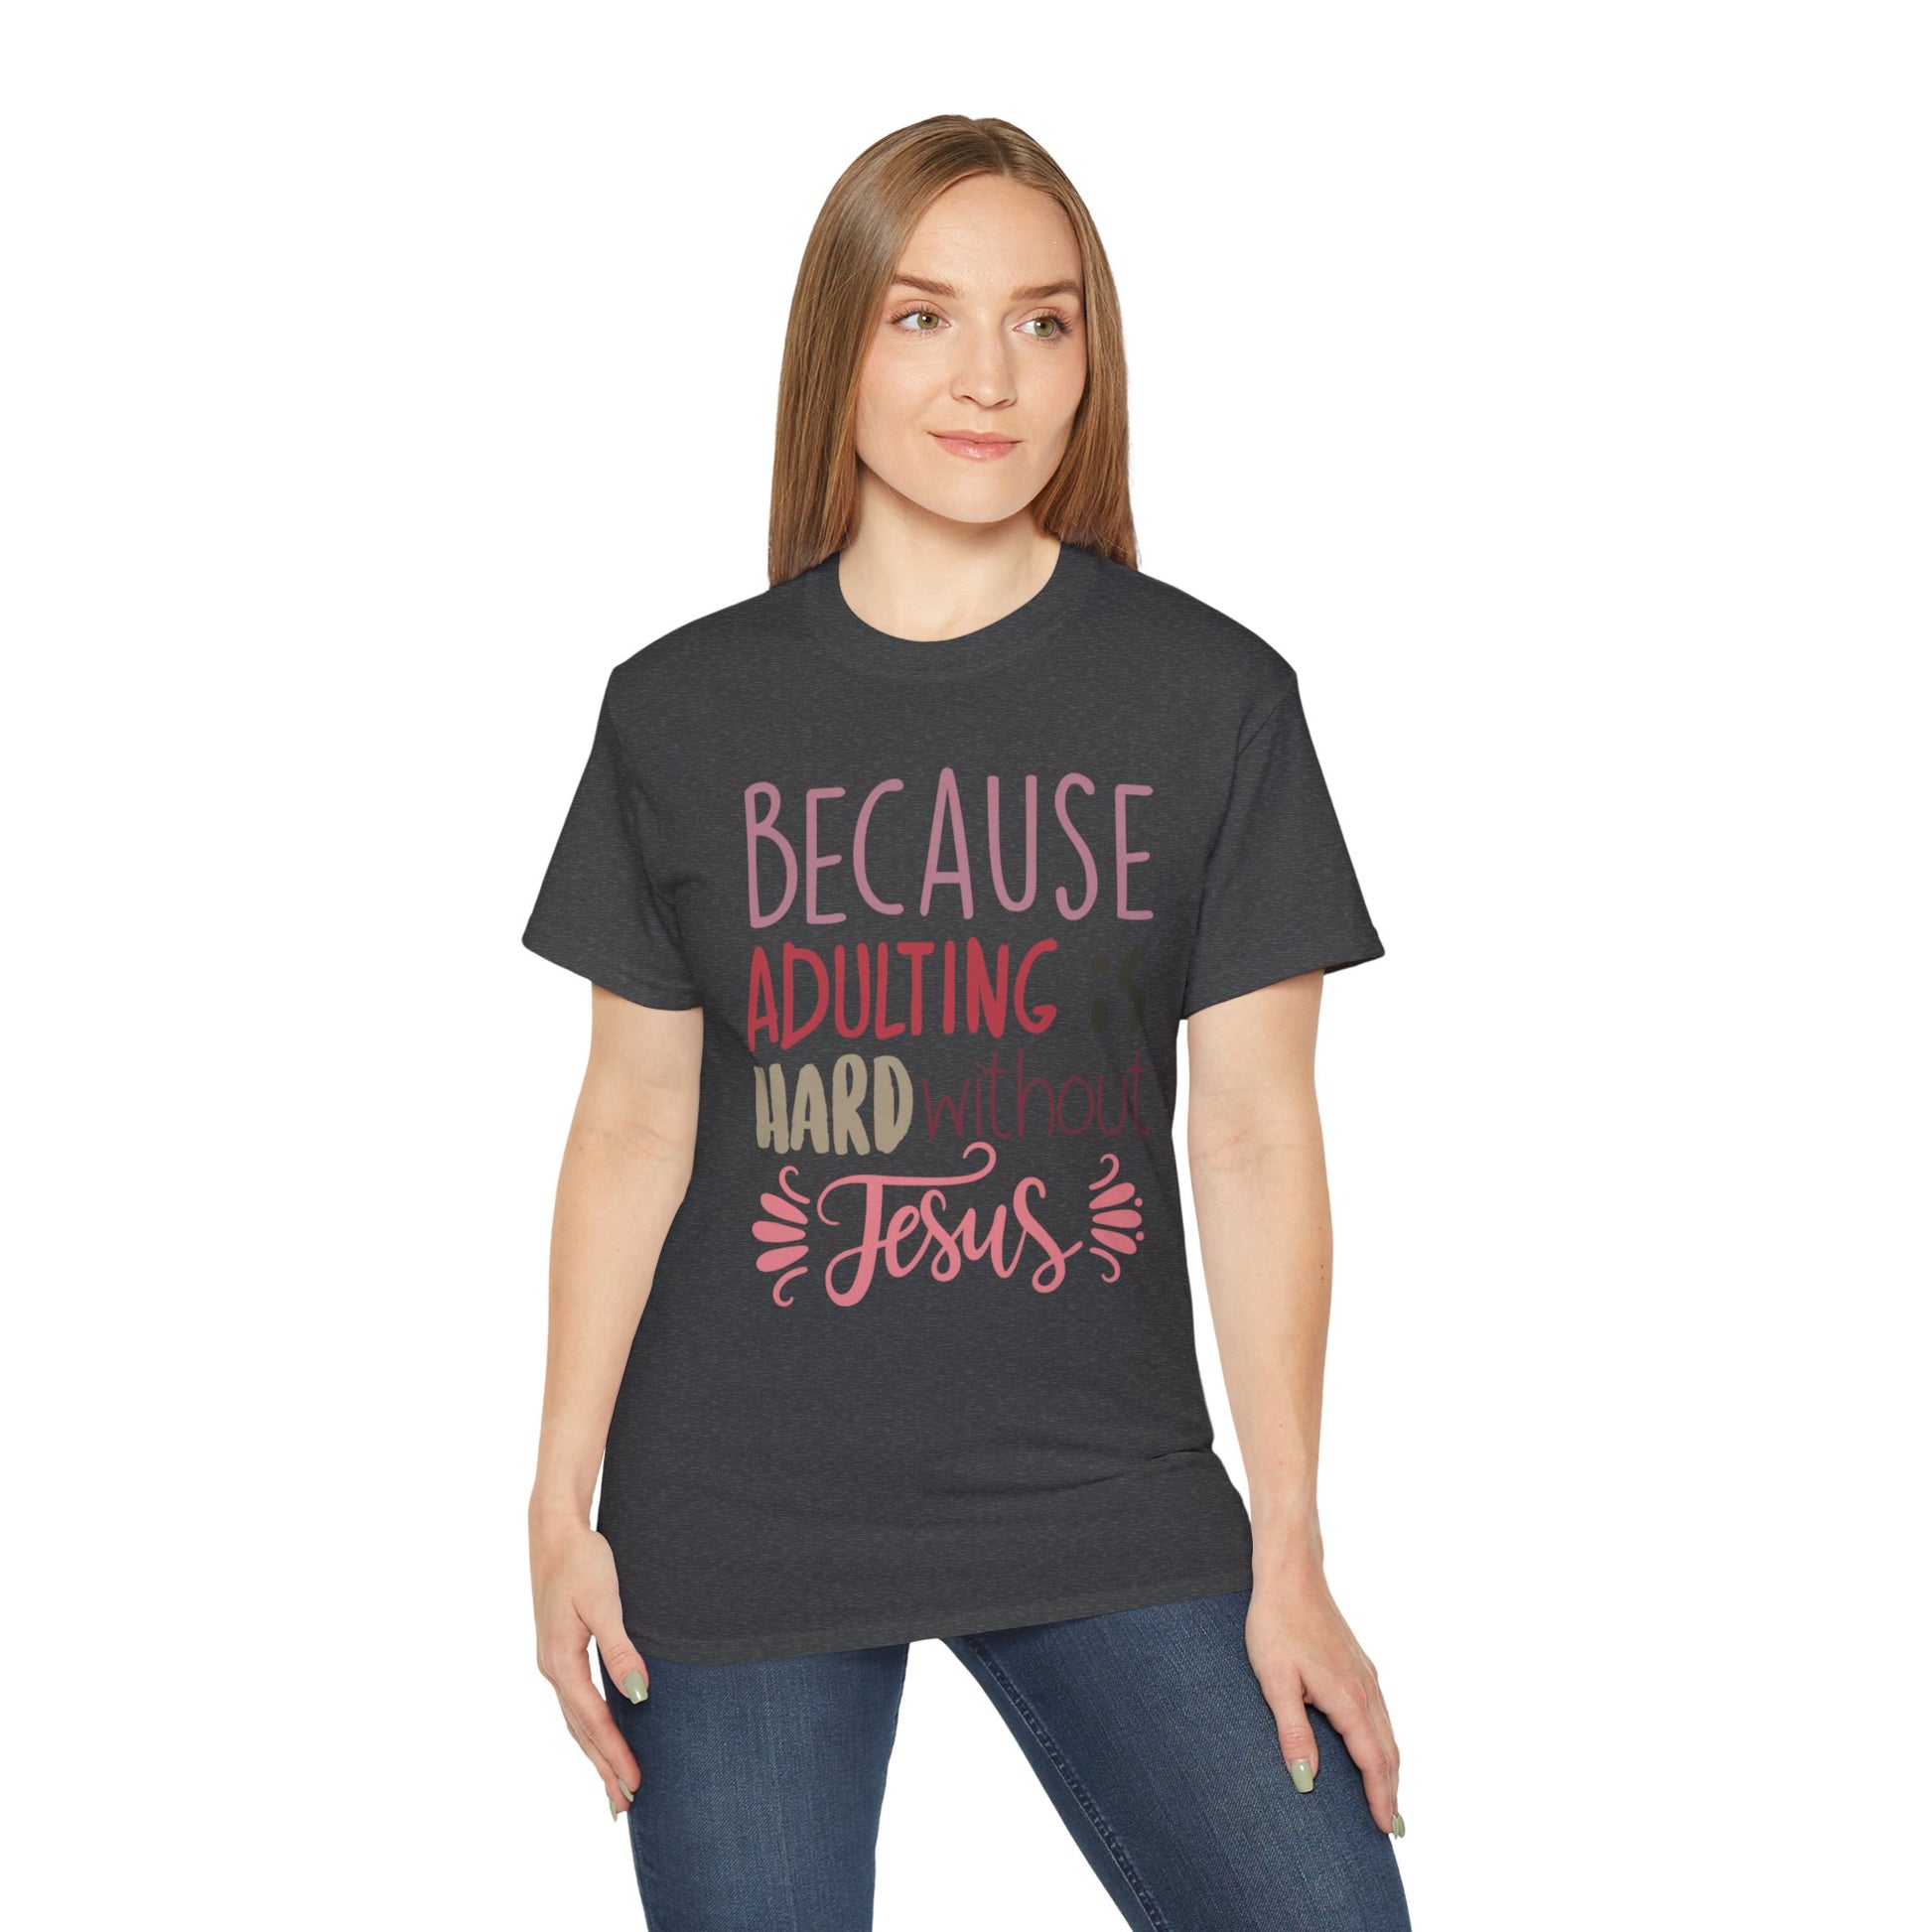 woman in dark heather shirt with words "Because Adulting is Hard without Jesus"